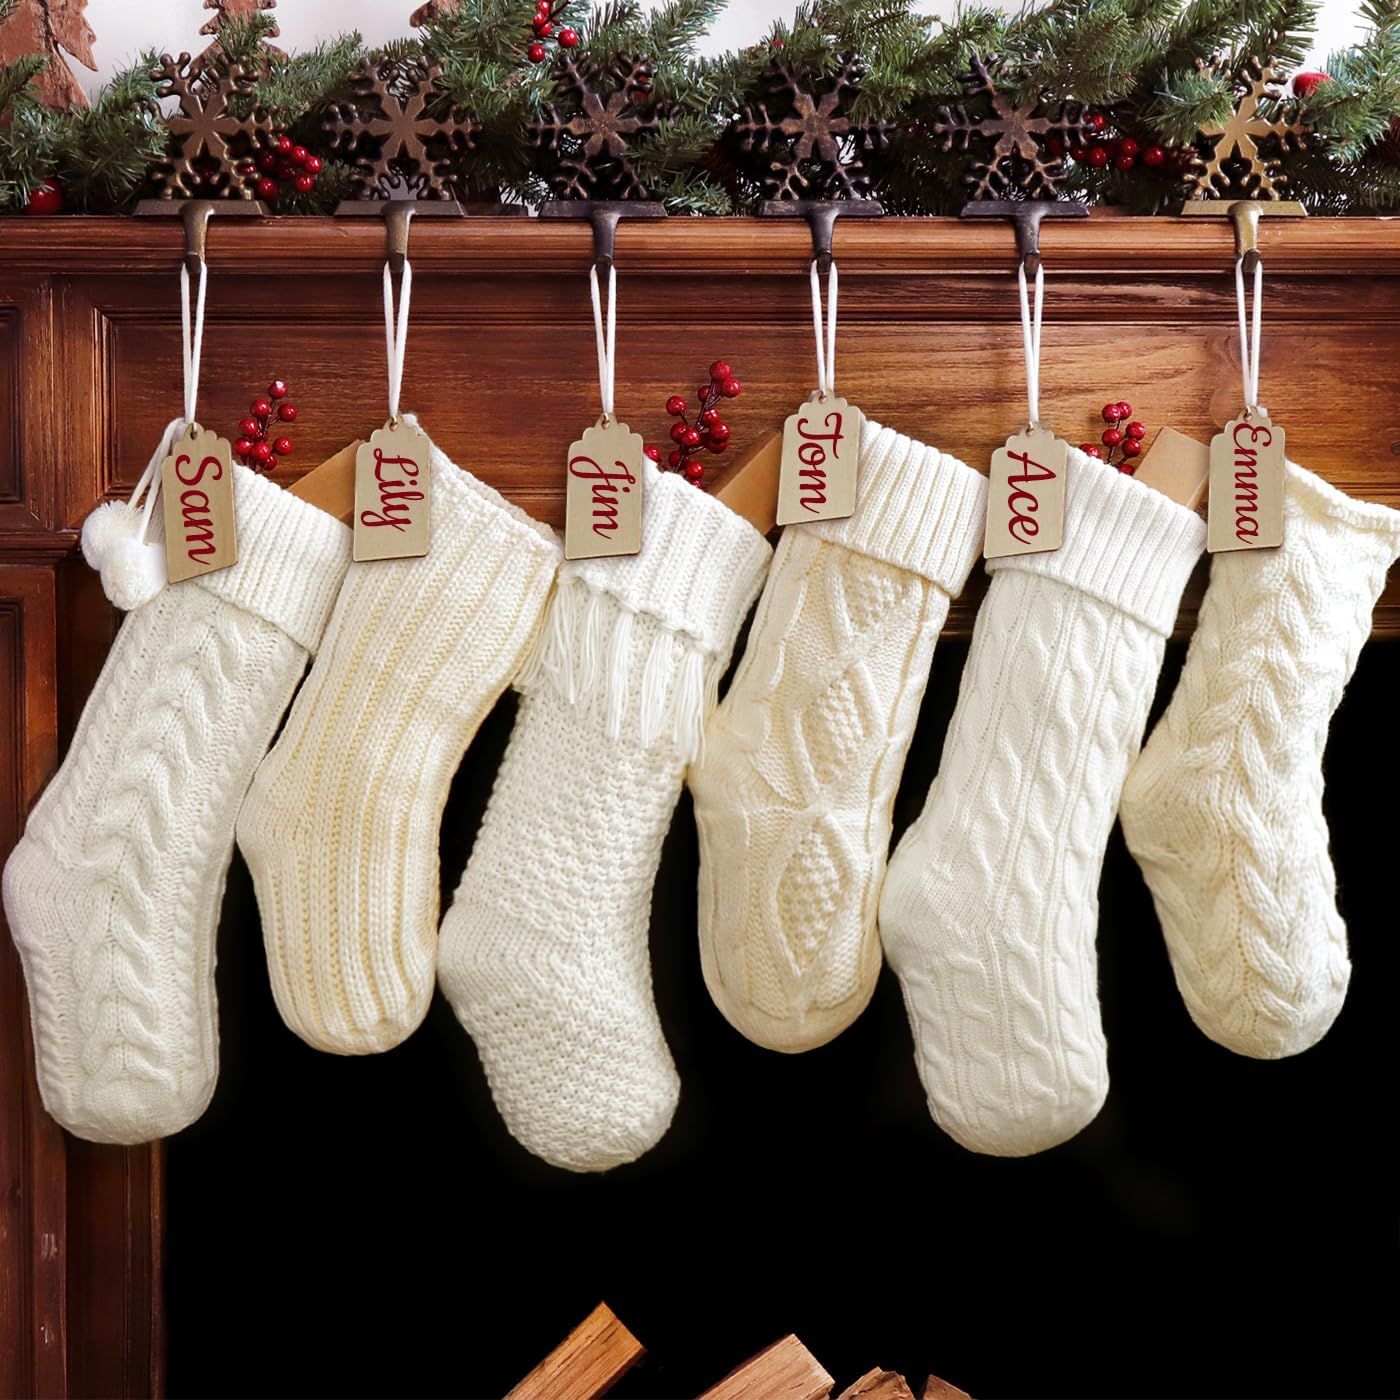 Pawliss Christmas Stockings: 6 Pack Cream & White Cable Knit Patterns Fireplace Stockings, Rustic... | Amazon (US)